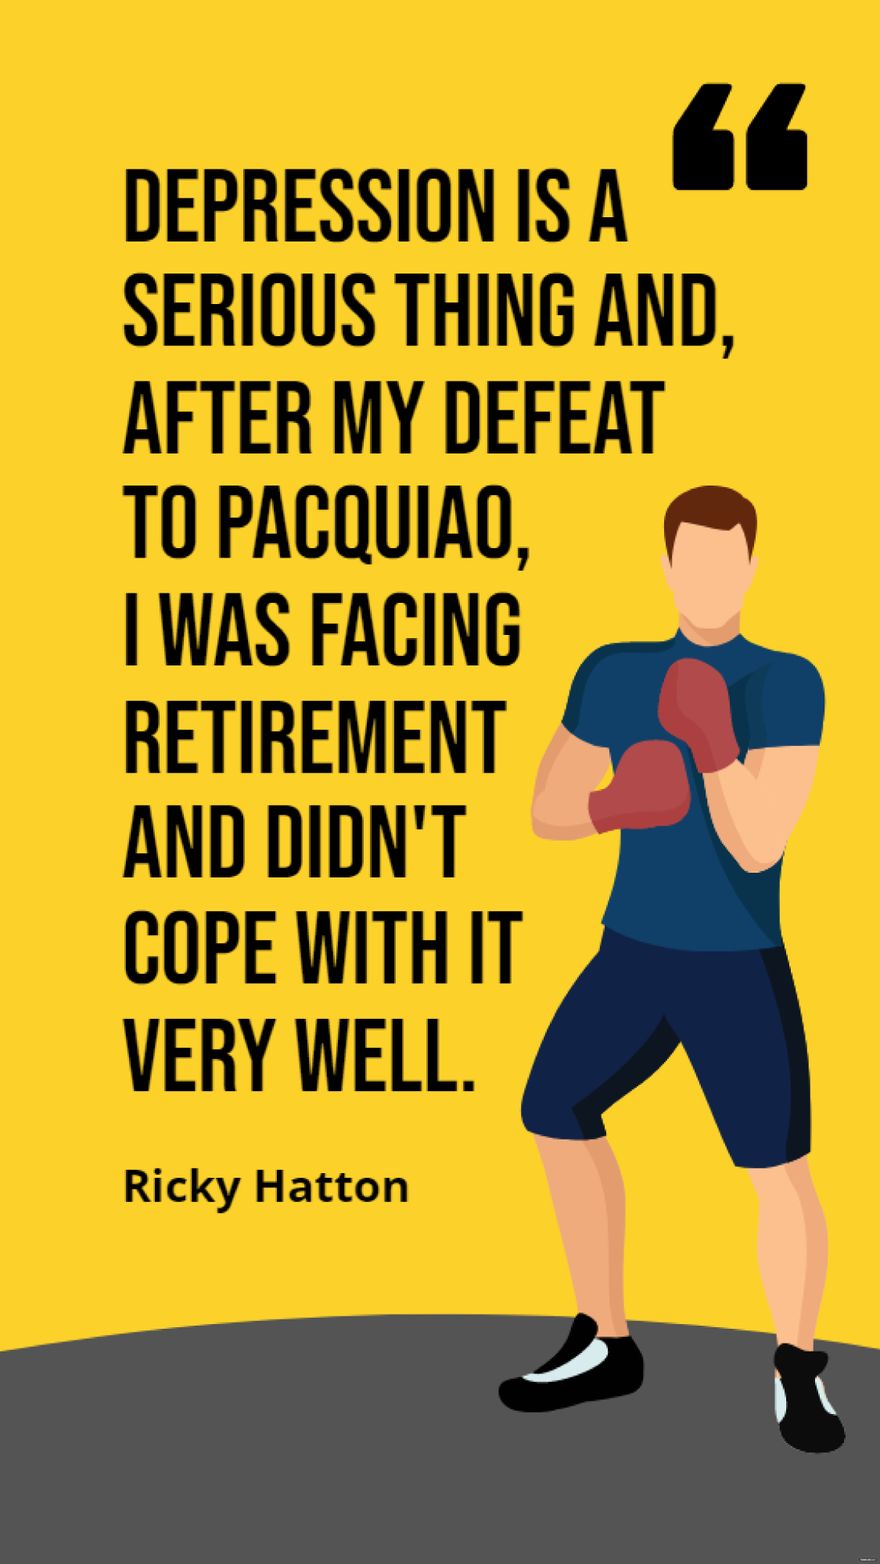 Ricky Hatton - Depression is a serious thing and, after my defeat to Pacquiao, I was facing retirement and didn't cope with it very well.